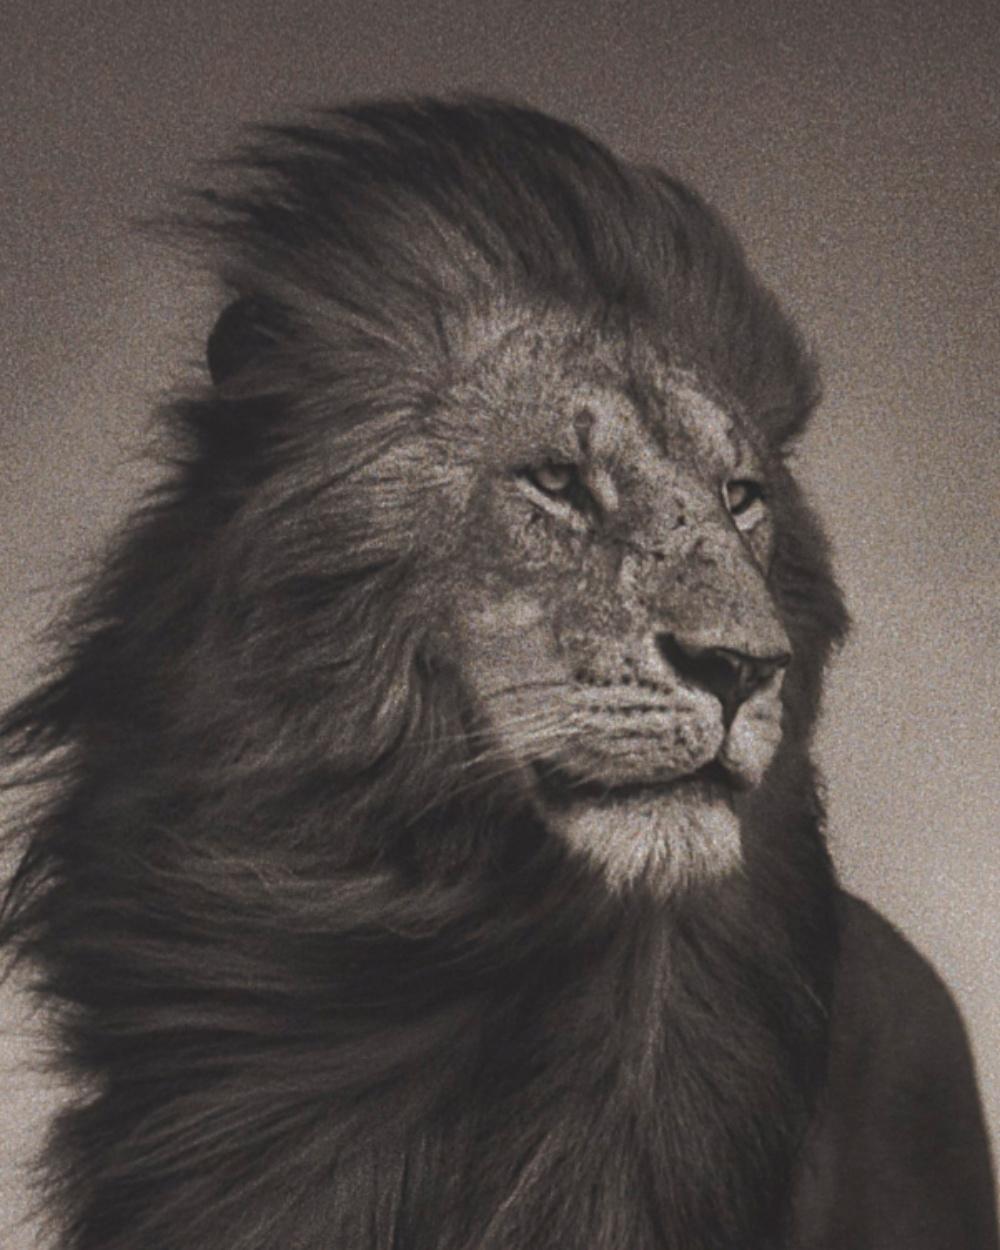 NICK BRANDT (*1966, England)
Lion Before Storm I, Masai Mara
2006
Archival Pigment Print
Sheet 50,8 x 64.26 cm (20 x 25 1/4 in.)
Edition of 25, plus 3 AP; AP3 (from a sold out Edition)
Framed

Nick Brandt is a contemporary English photographer. His